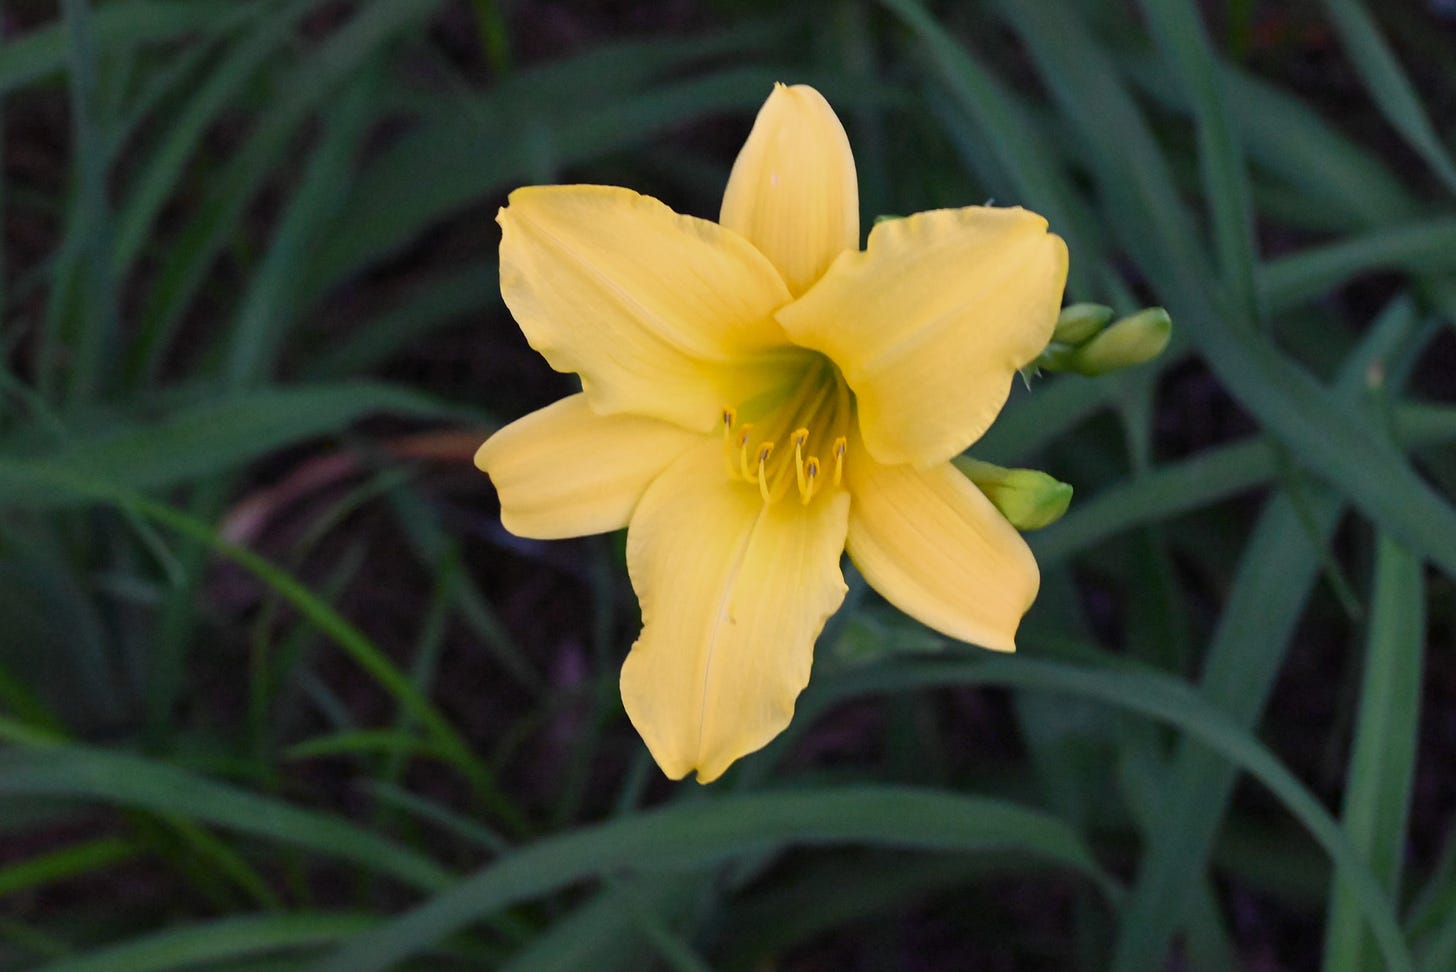 A single yellow daylily against the green leaves